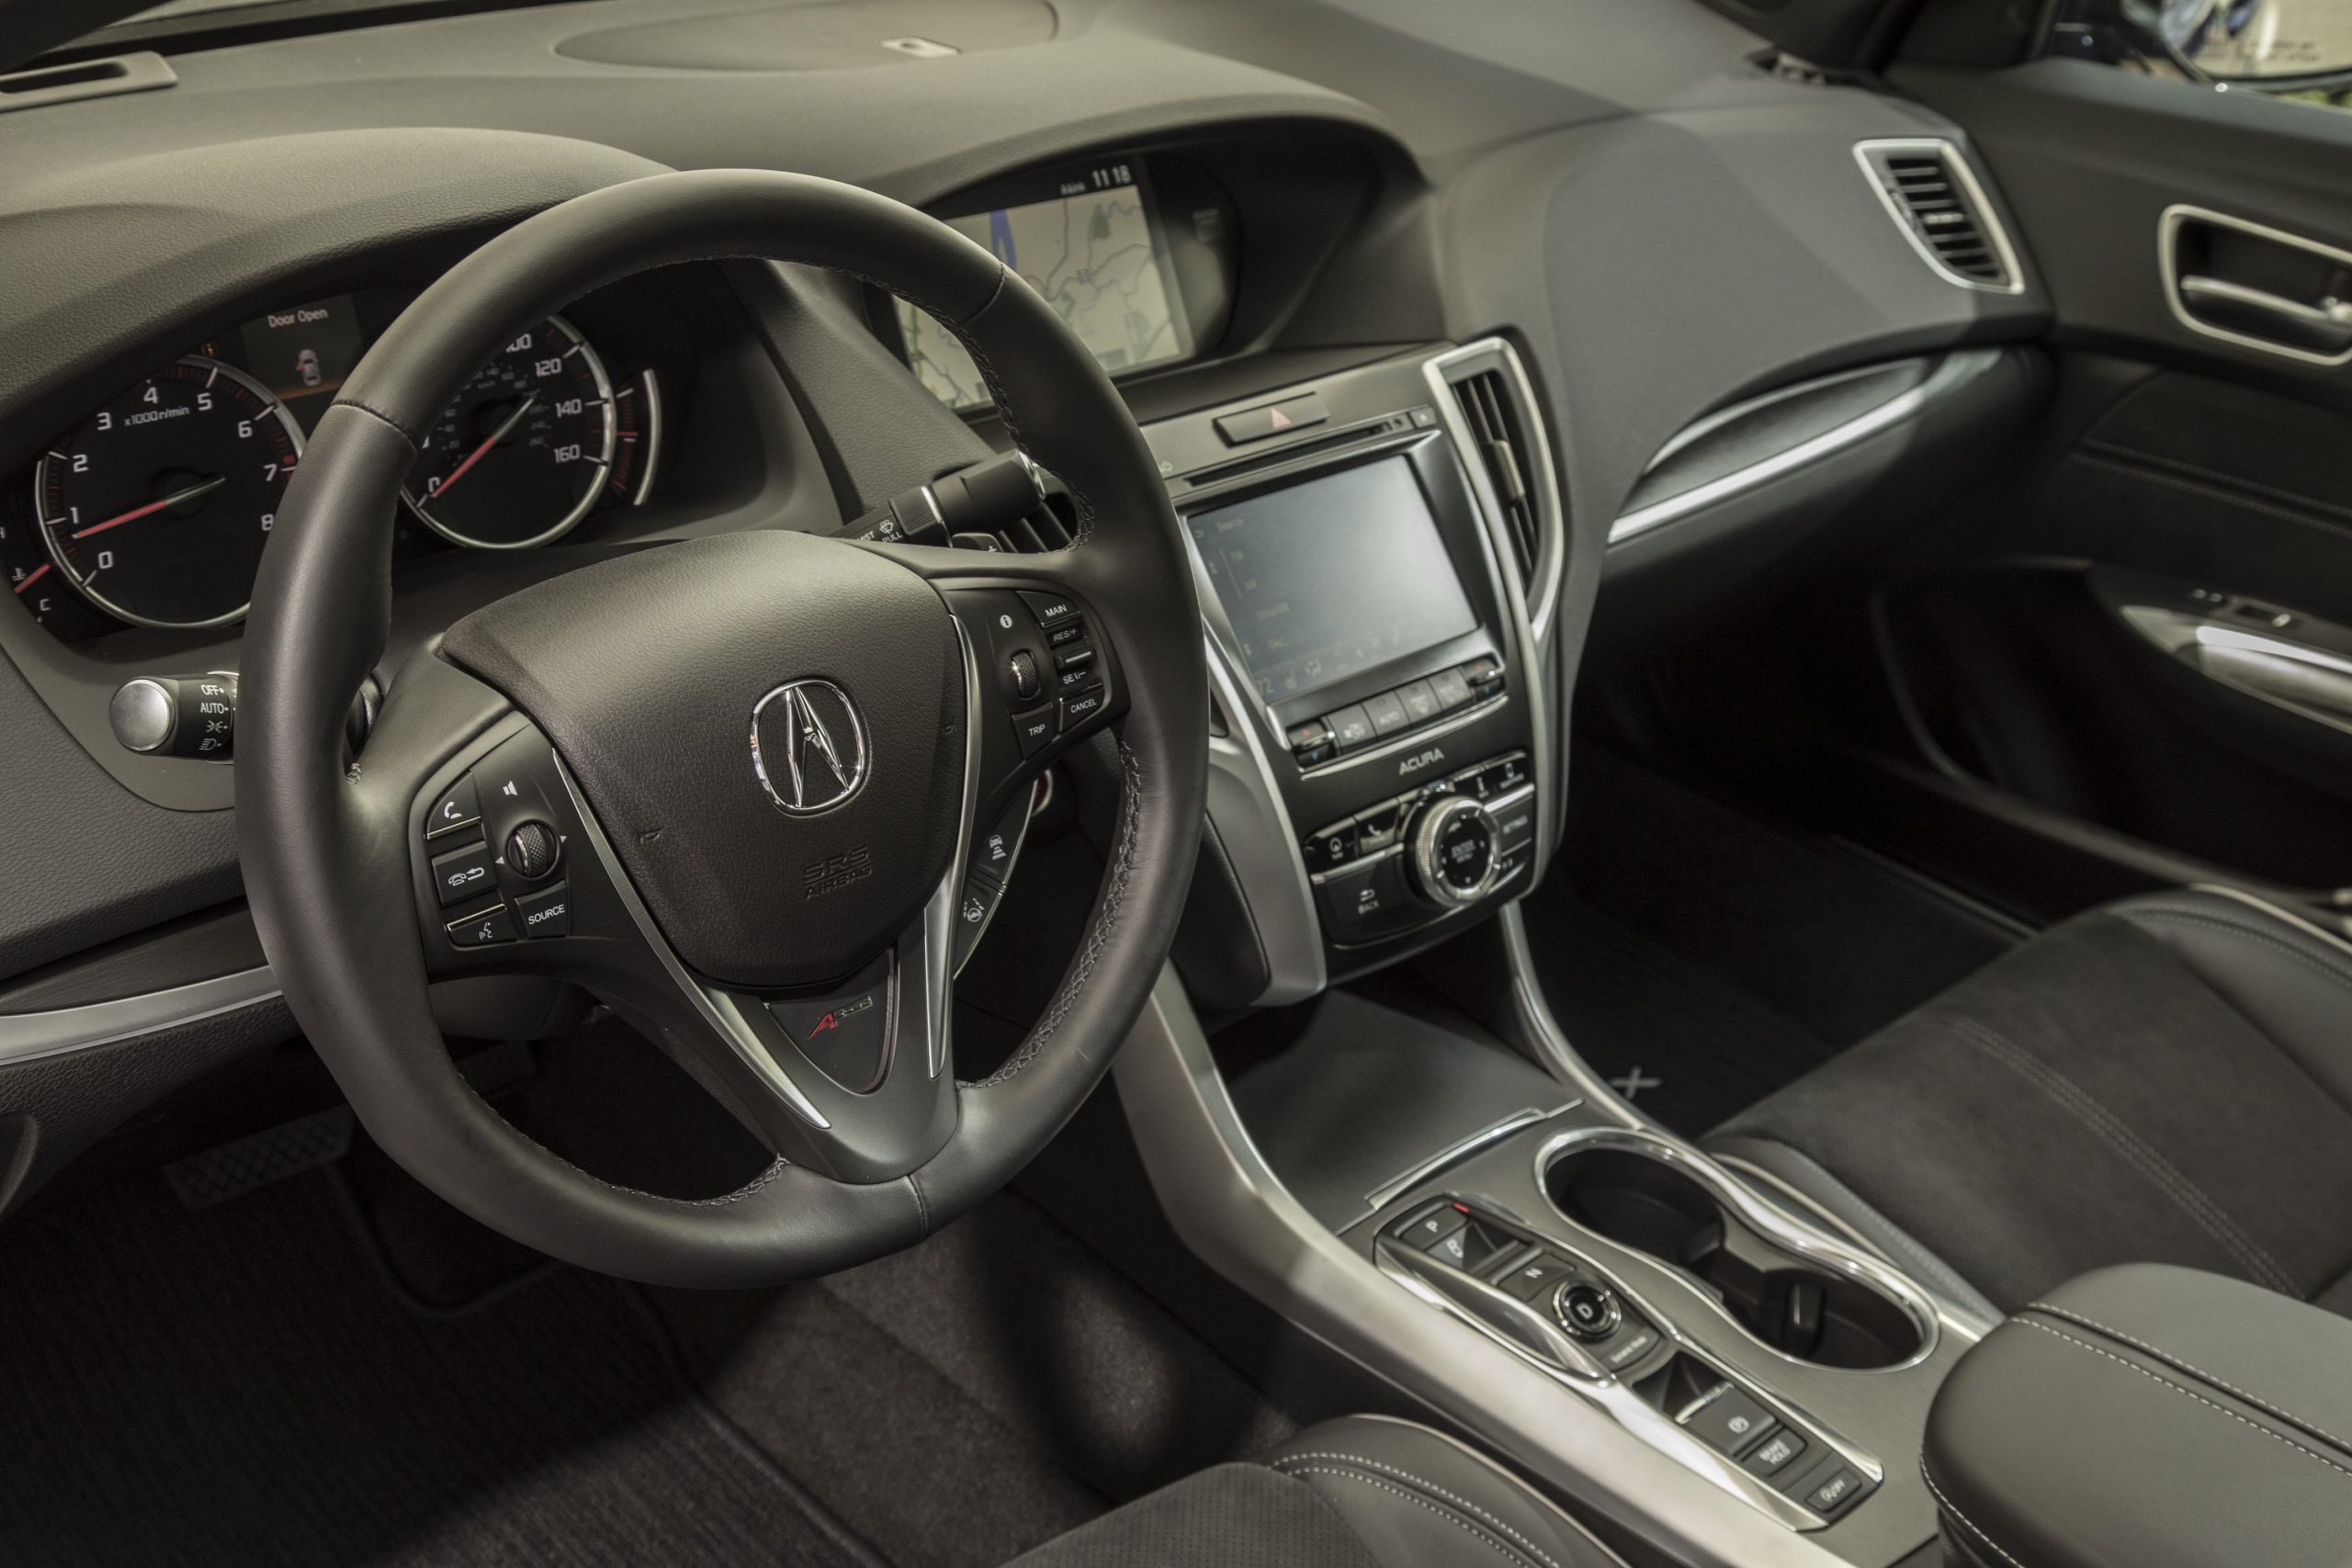 The black interior of the Acura TLX